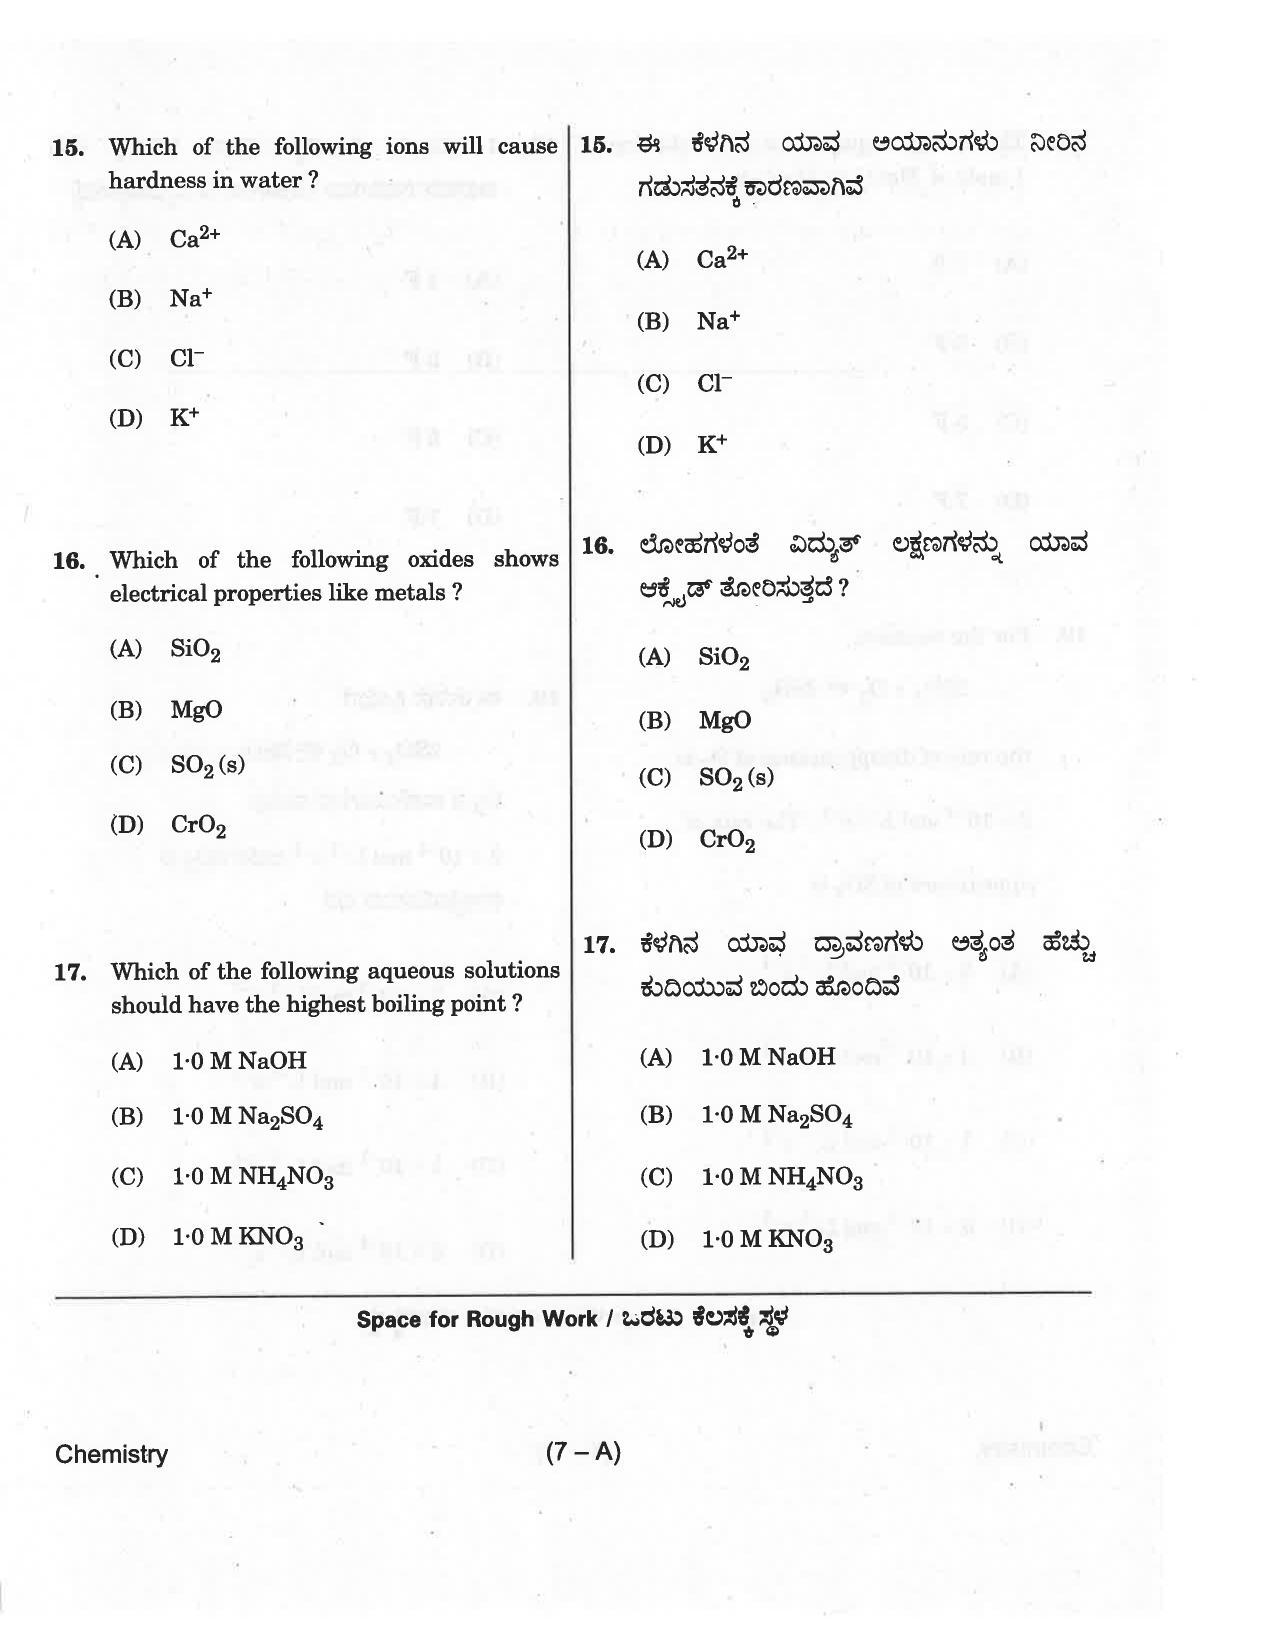 KCET Chemistry 2018 Question Papers - Page 7